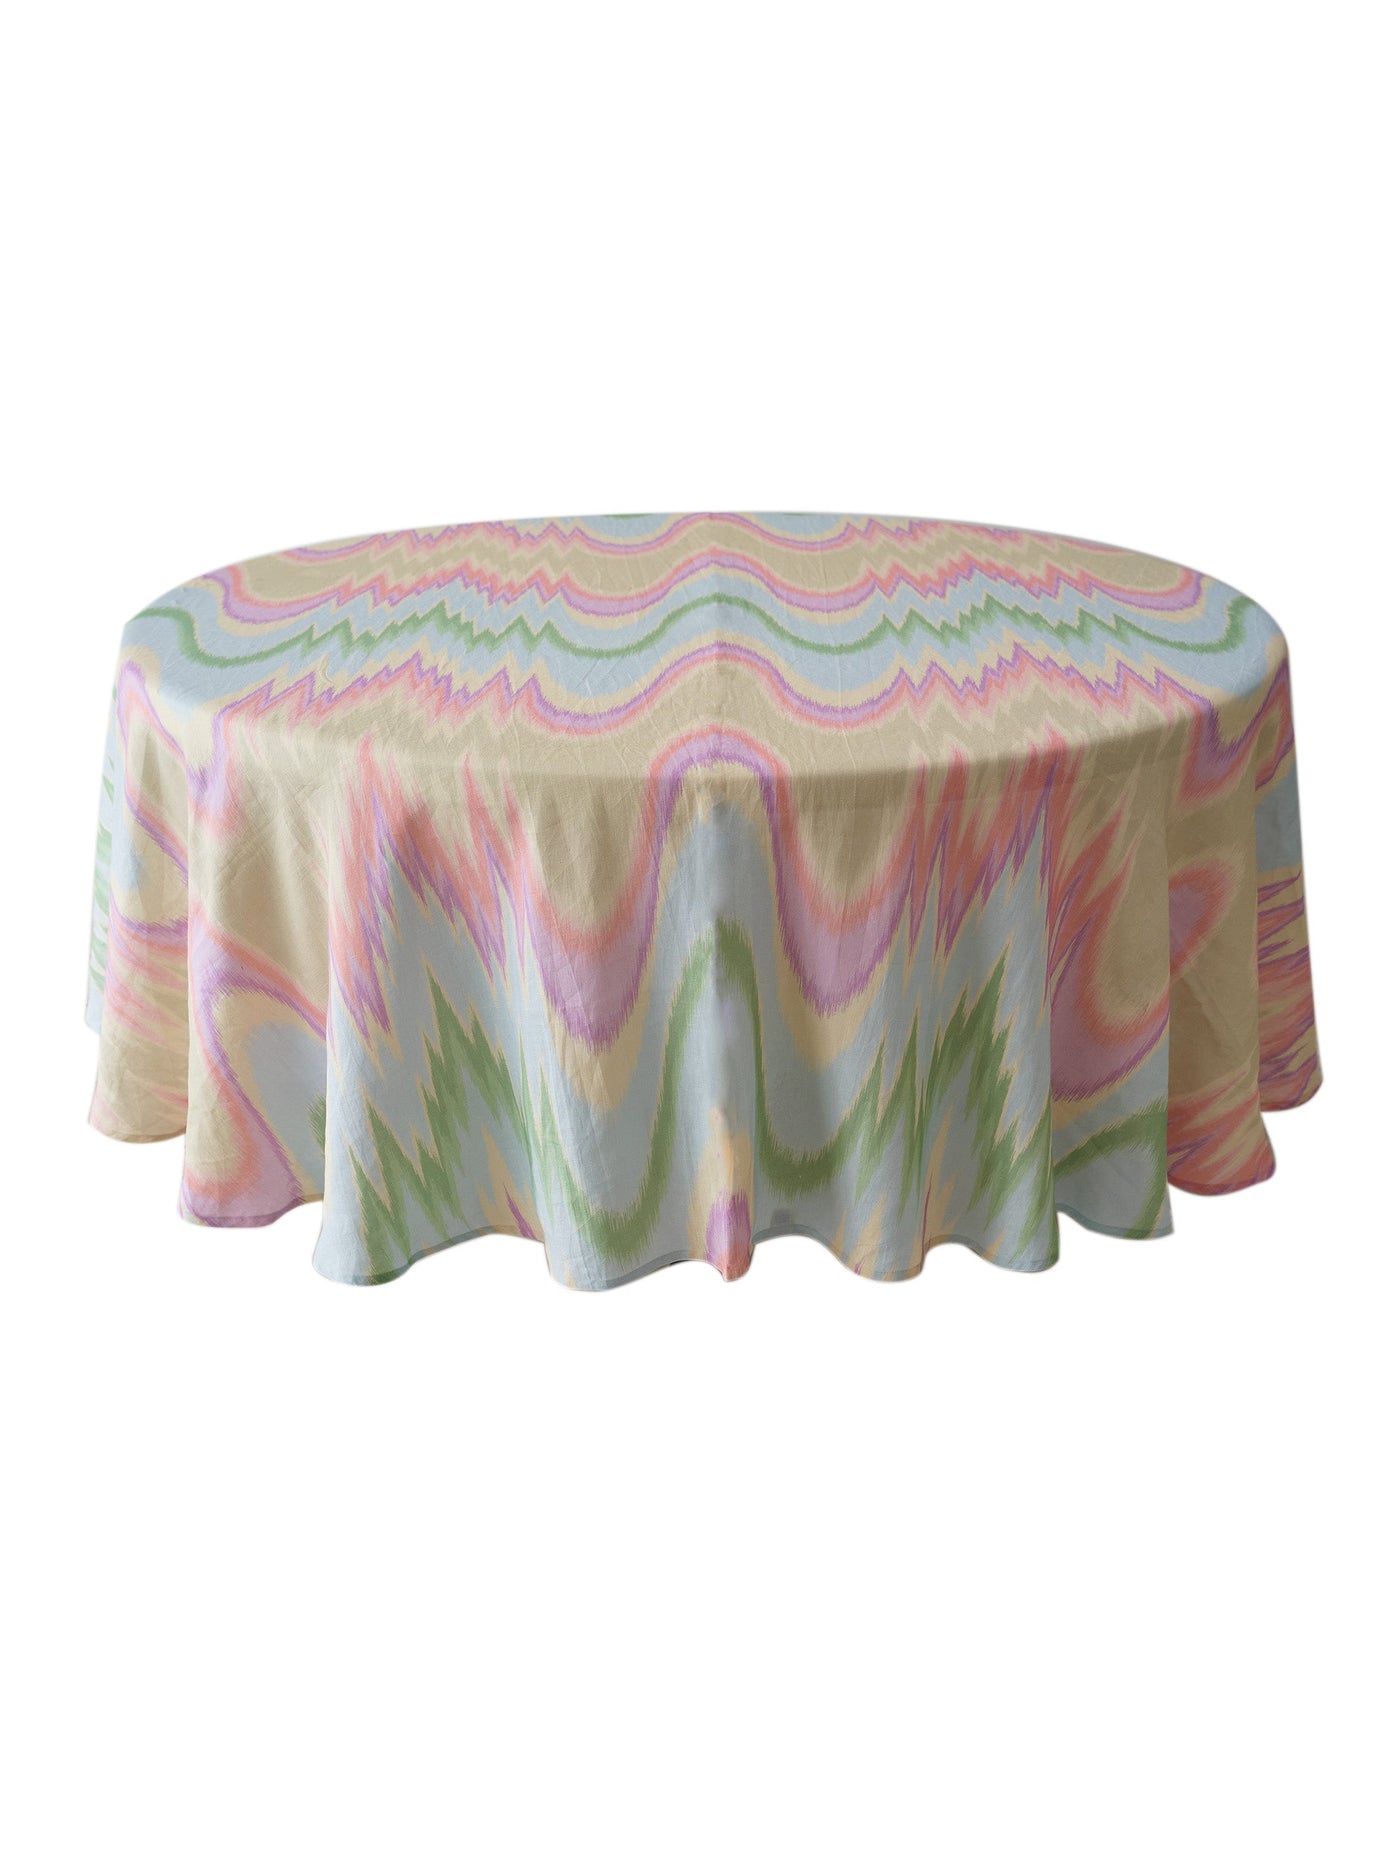 Aurora Round Tablecloth 260 cm in Pastel by Permanent Resident